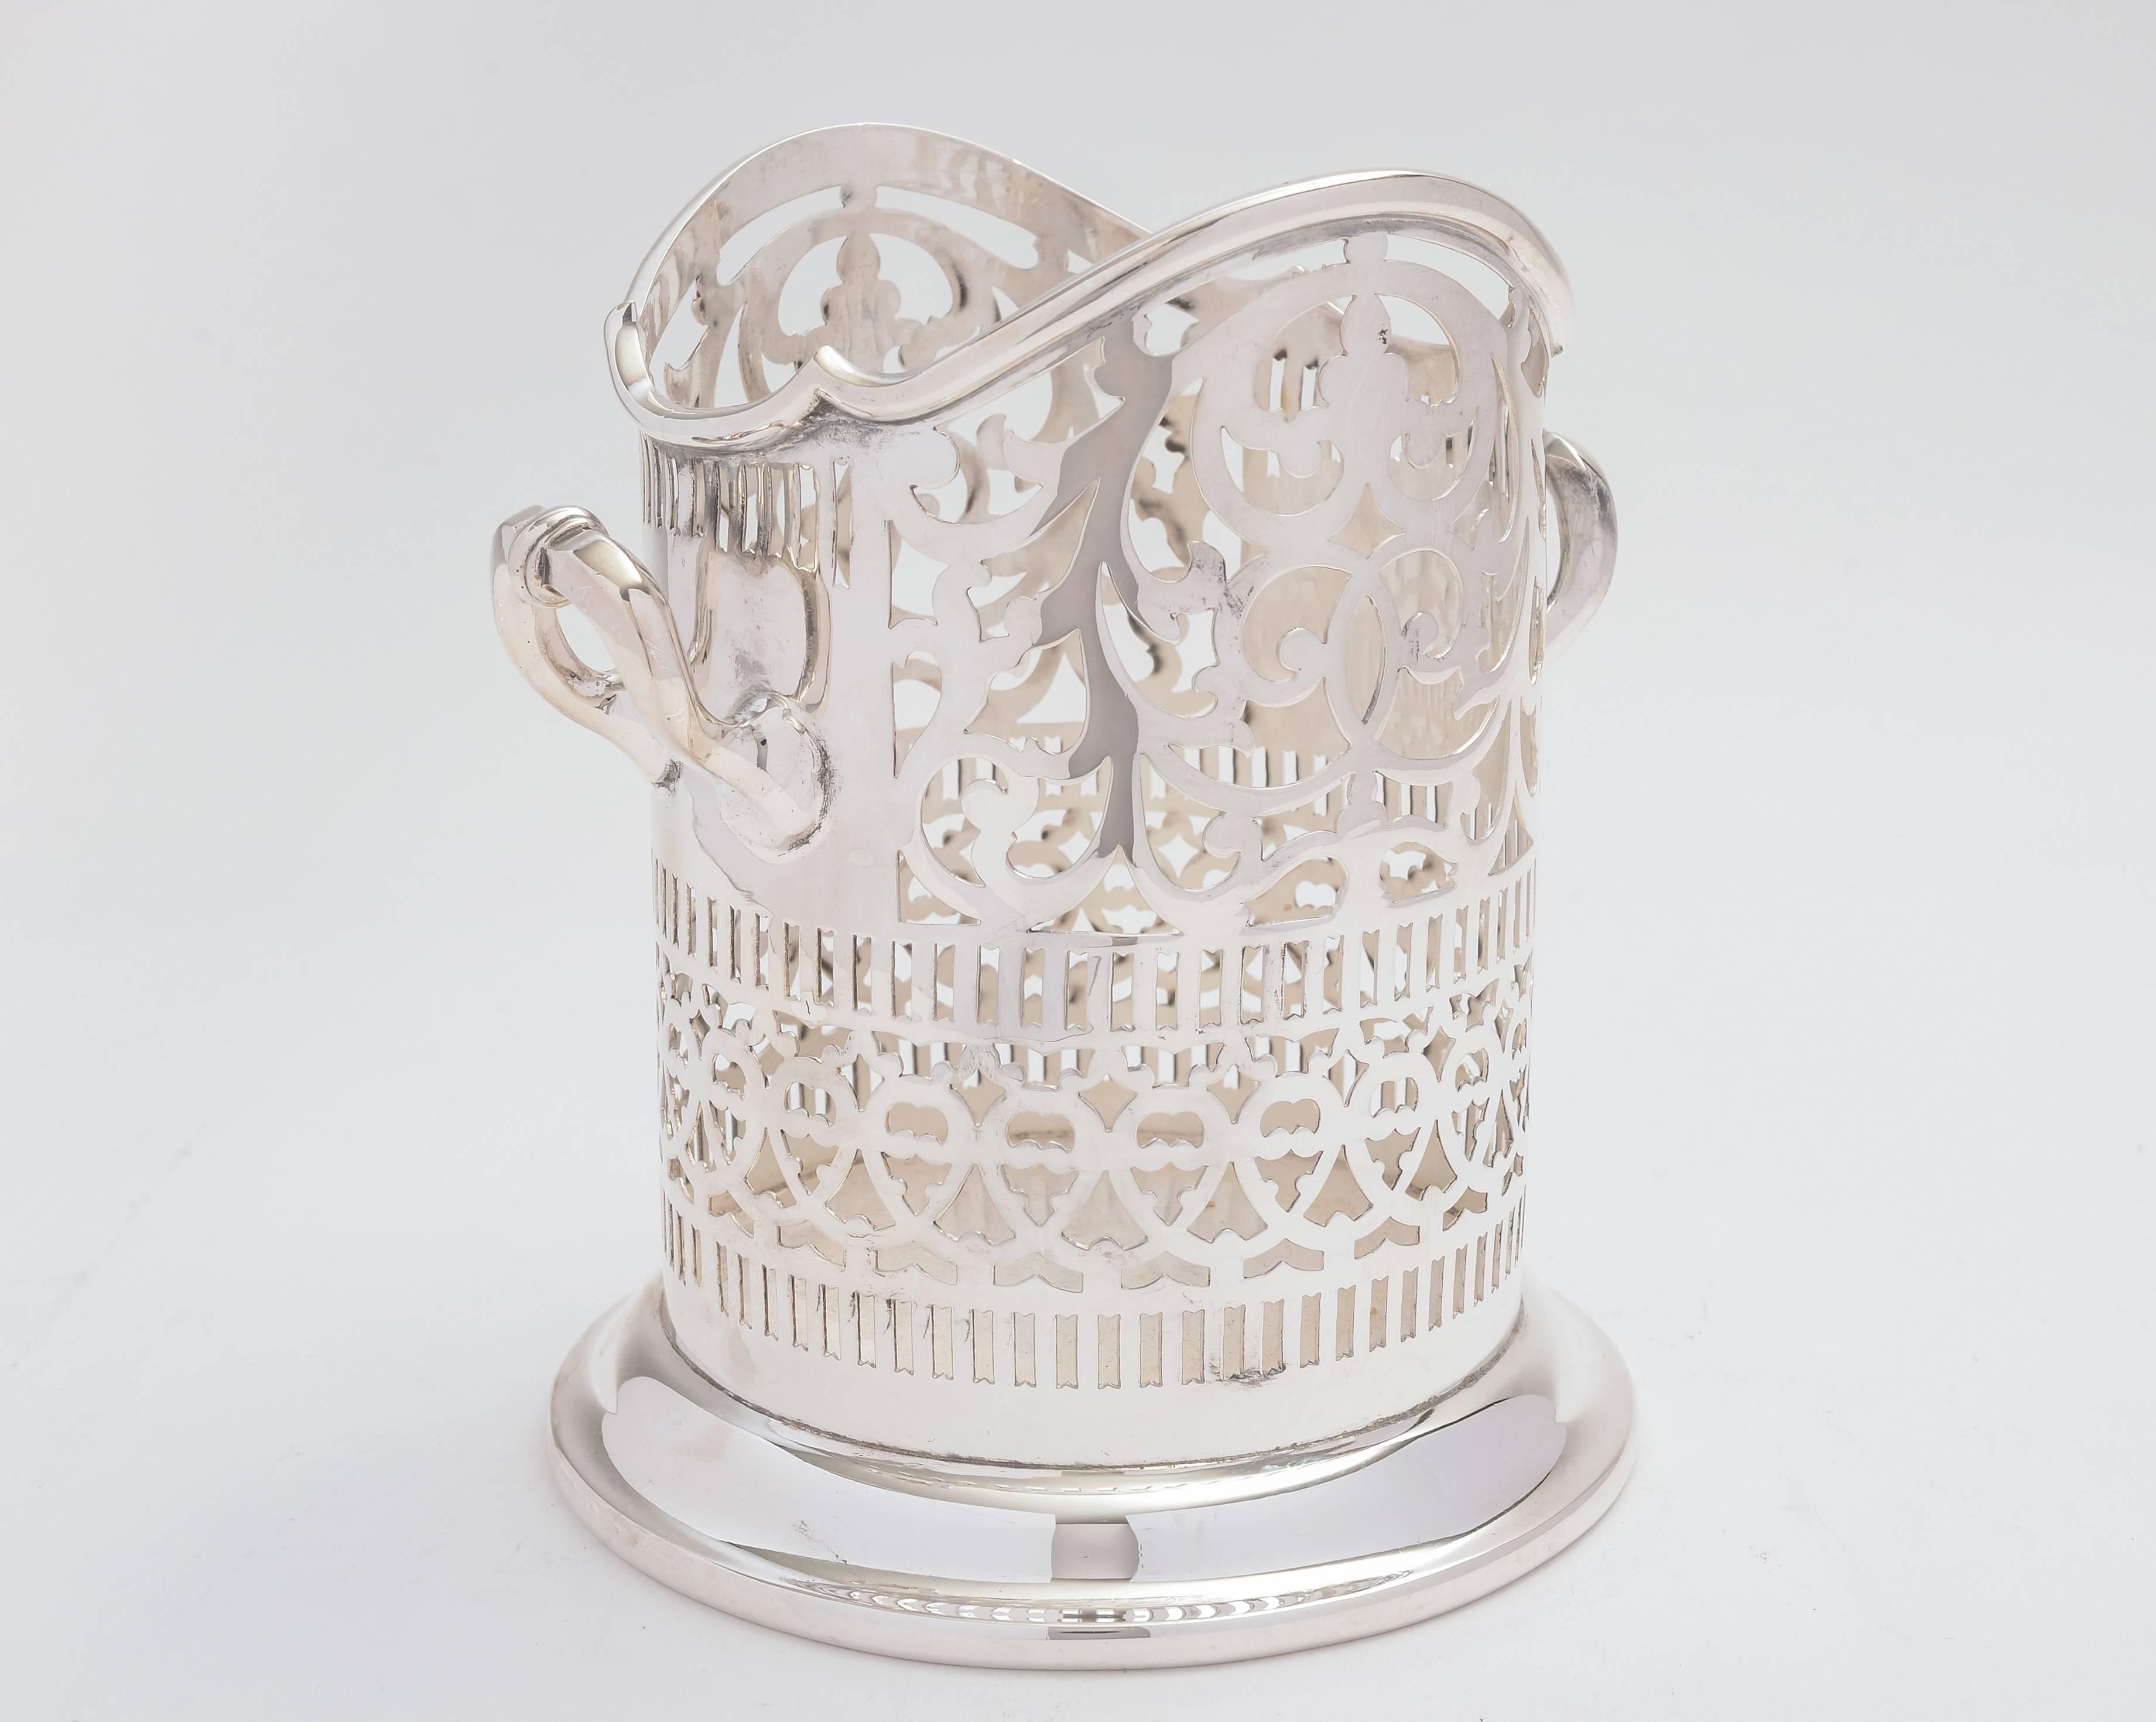 An Edwardian silver plated wine bottle holder with lovely pierced decoration. Maker is Maxfield & Sons, Enterprise Works, Sheffield, 

circa 1910 in good condition

Dimensions: 
6.5